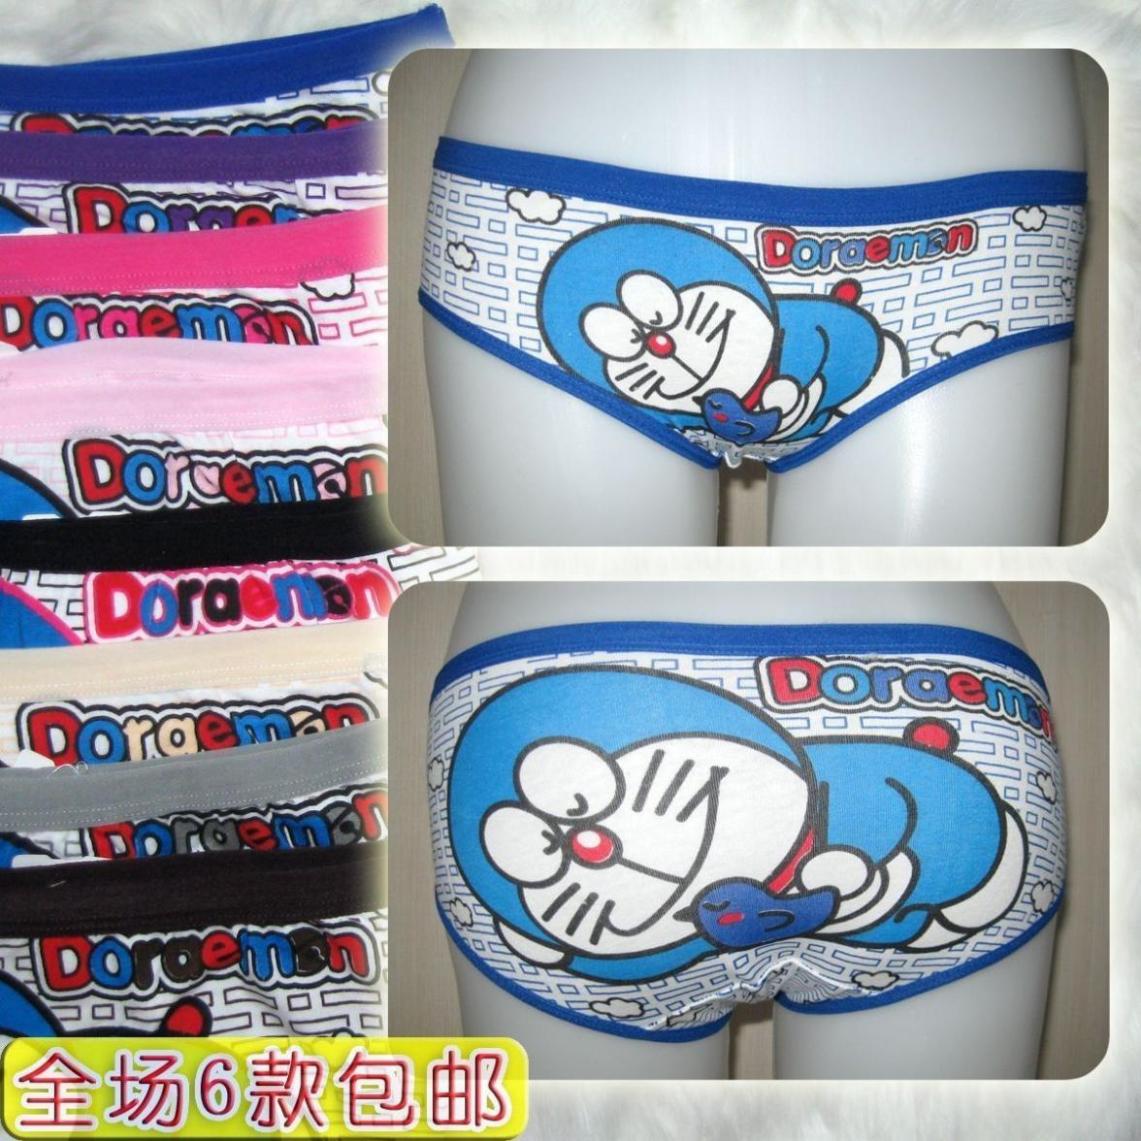 2013 Ms # 9262 cotton underwear cartoon jingle more la a dream ladies sometimes called tighty whities they 8 color cotton